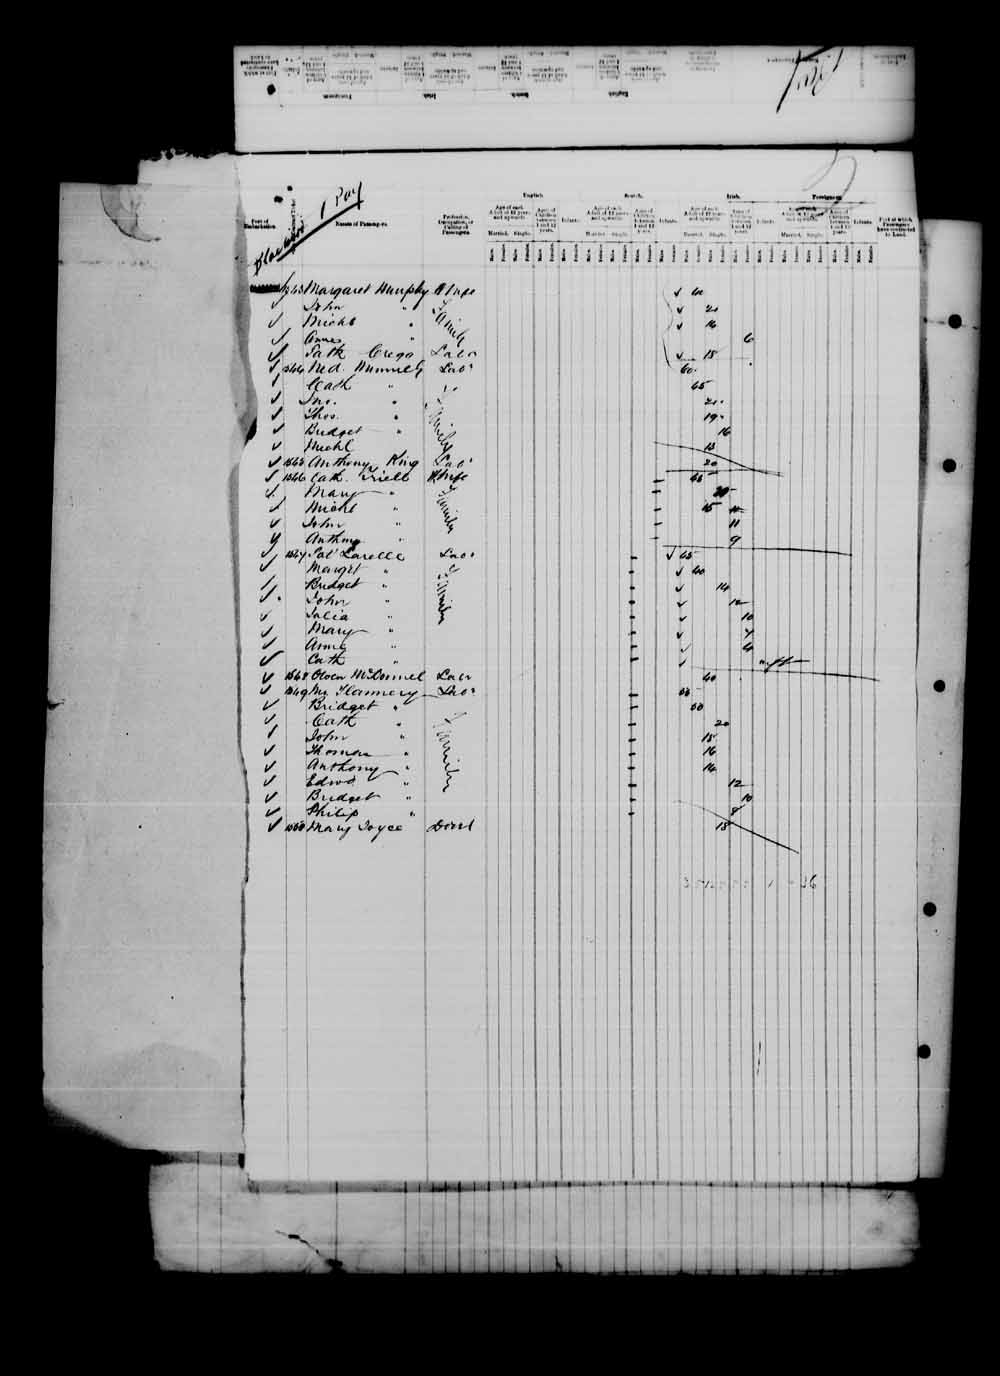 Digitized page of Passenger Lists for Image No.: e003542682